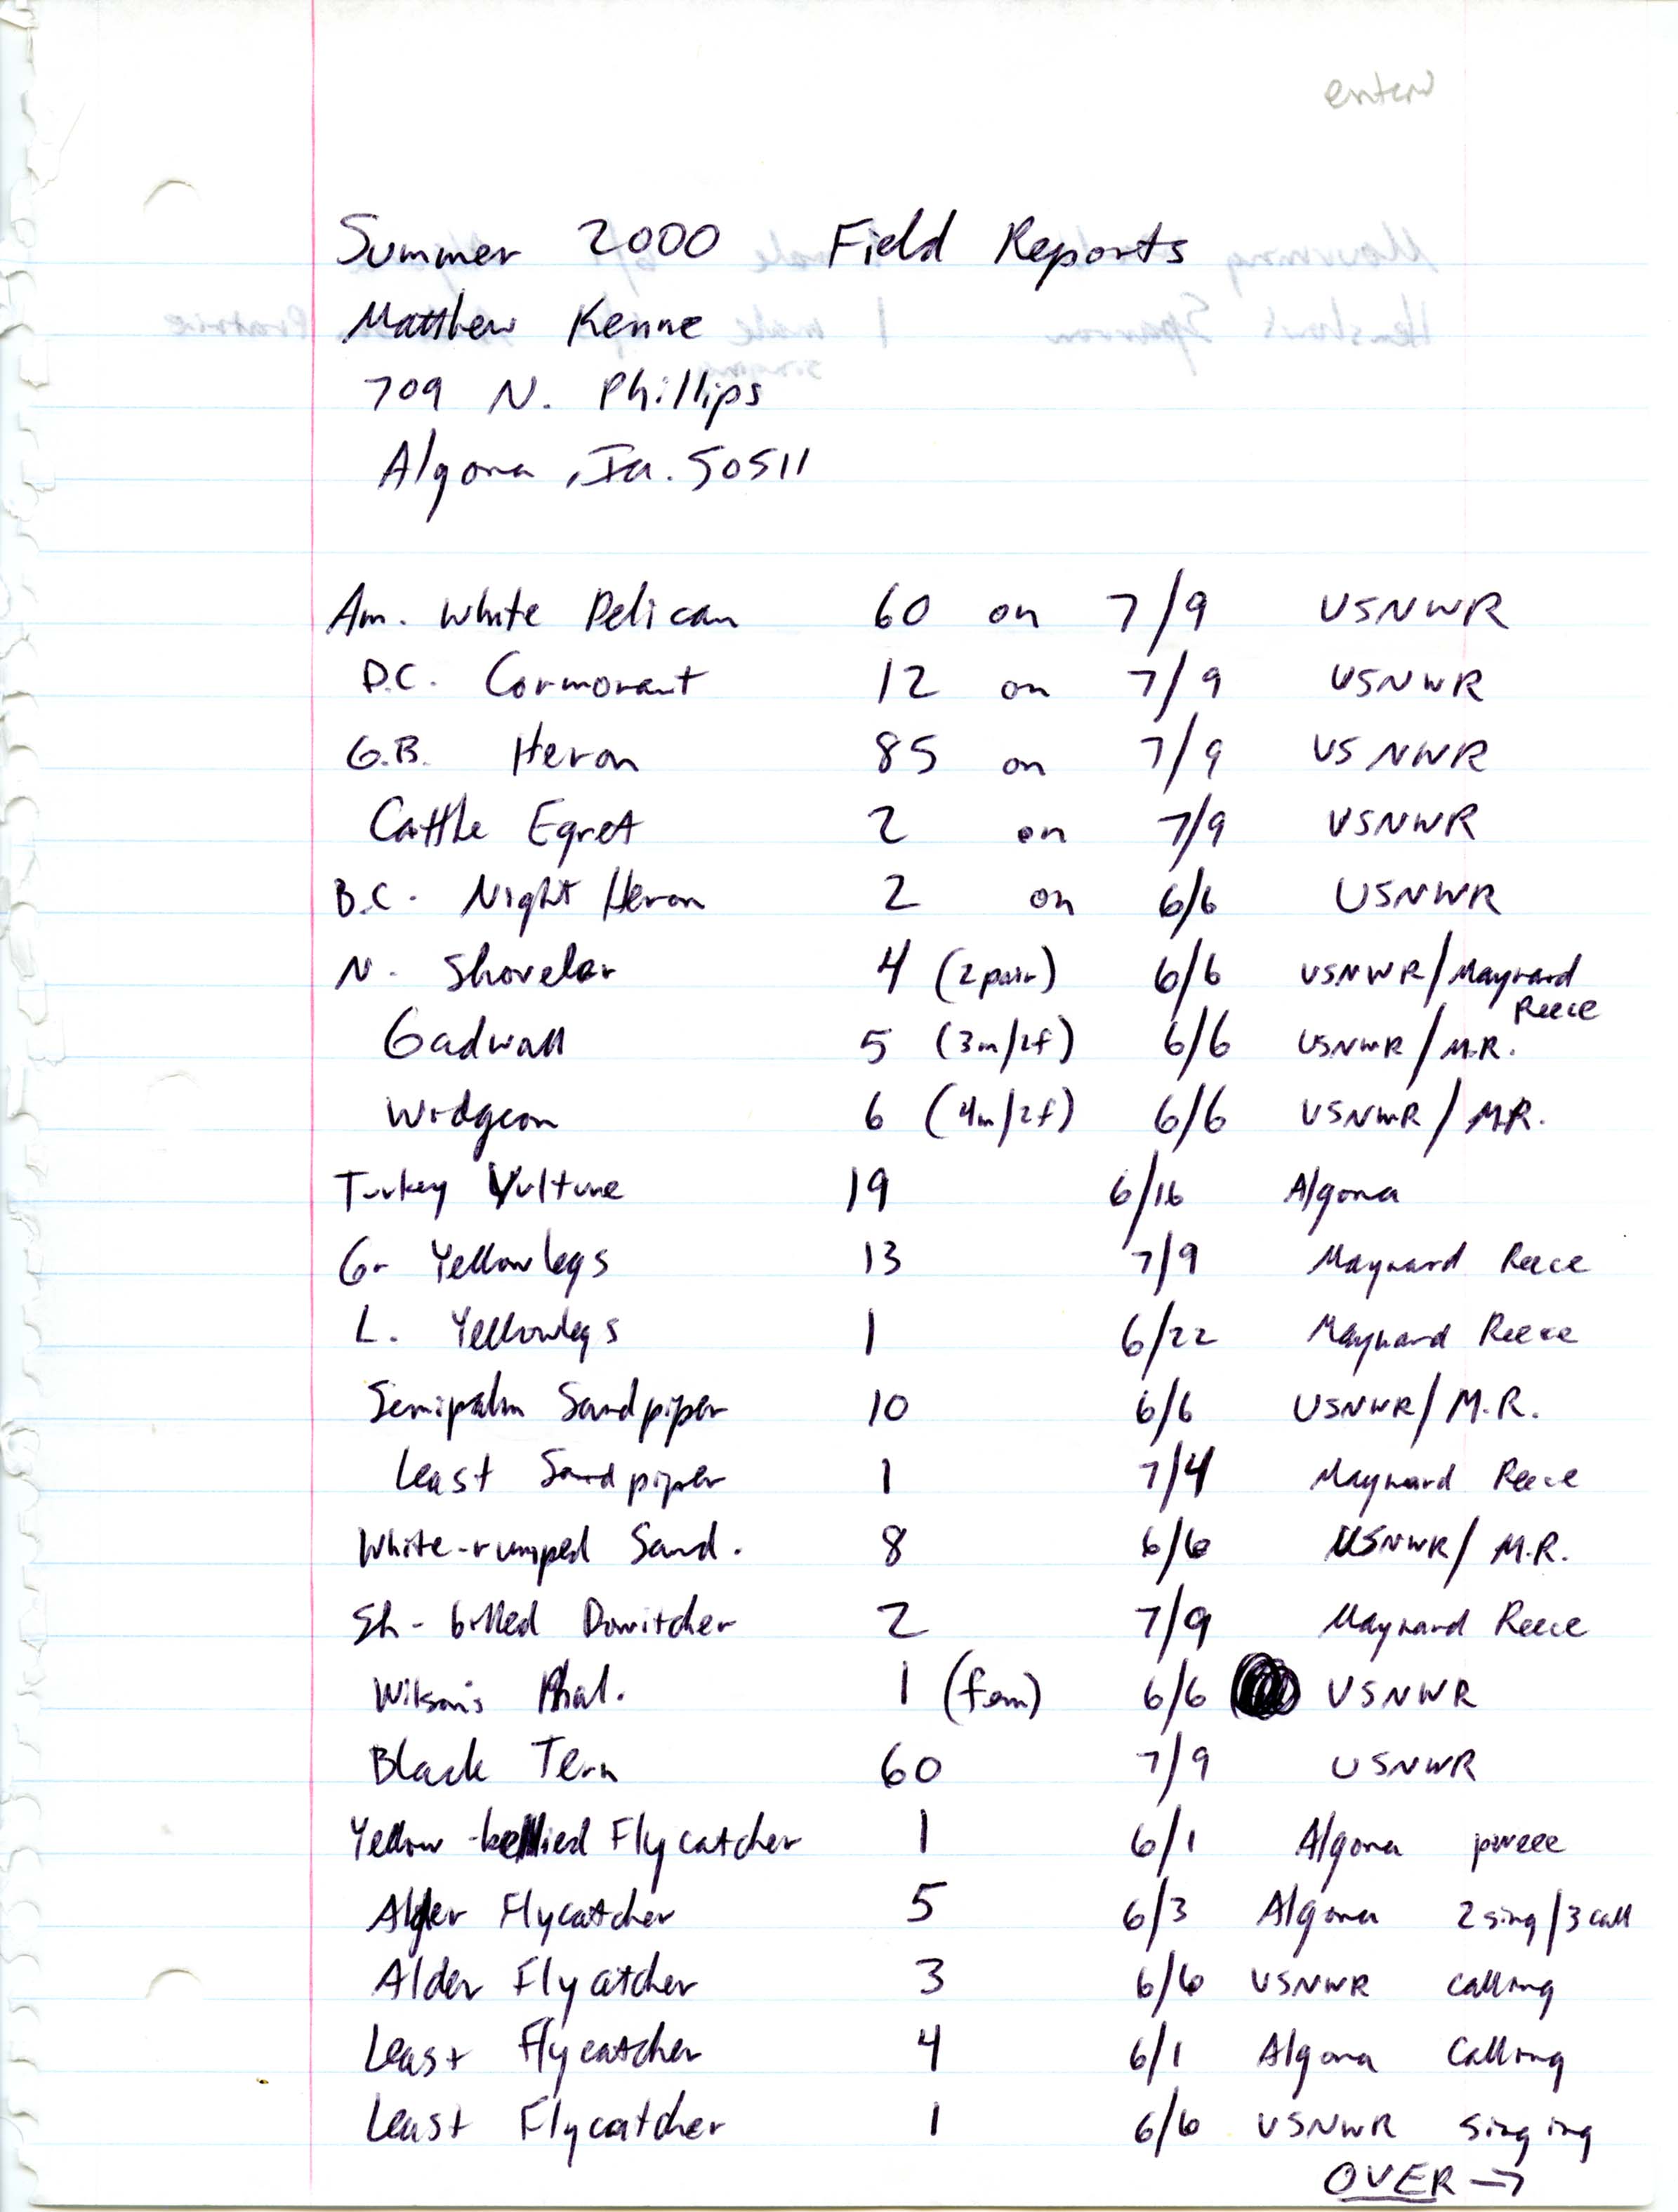 Field notes contributed by Matthew Kenne, summer 2000